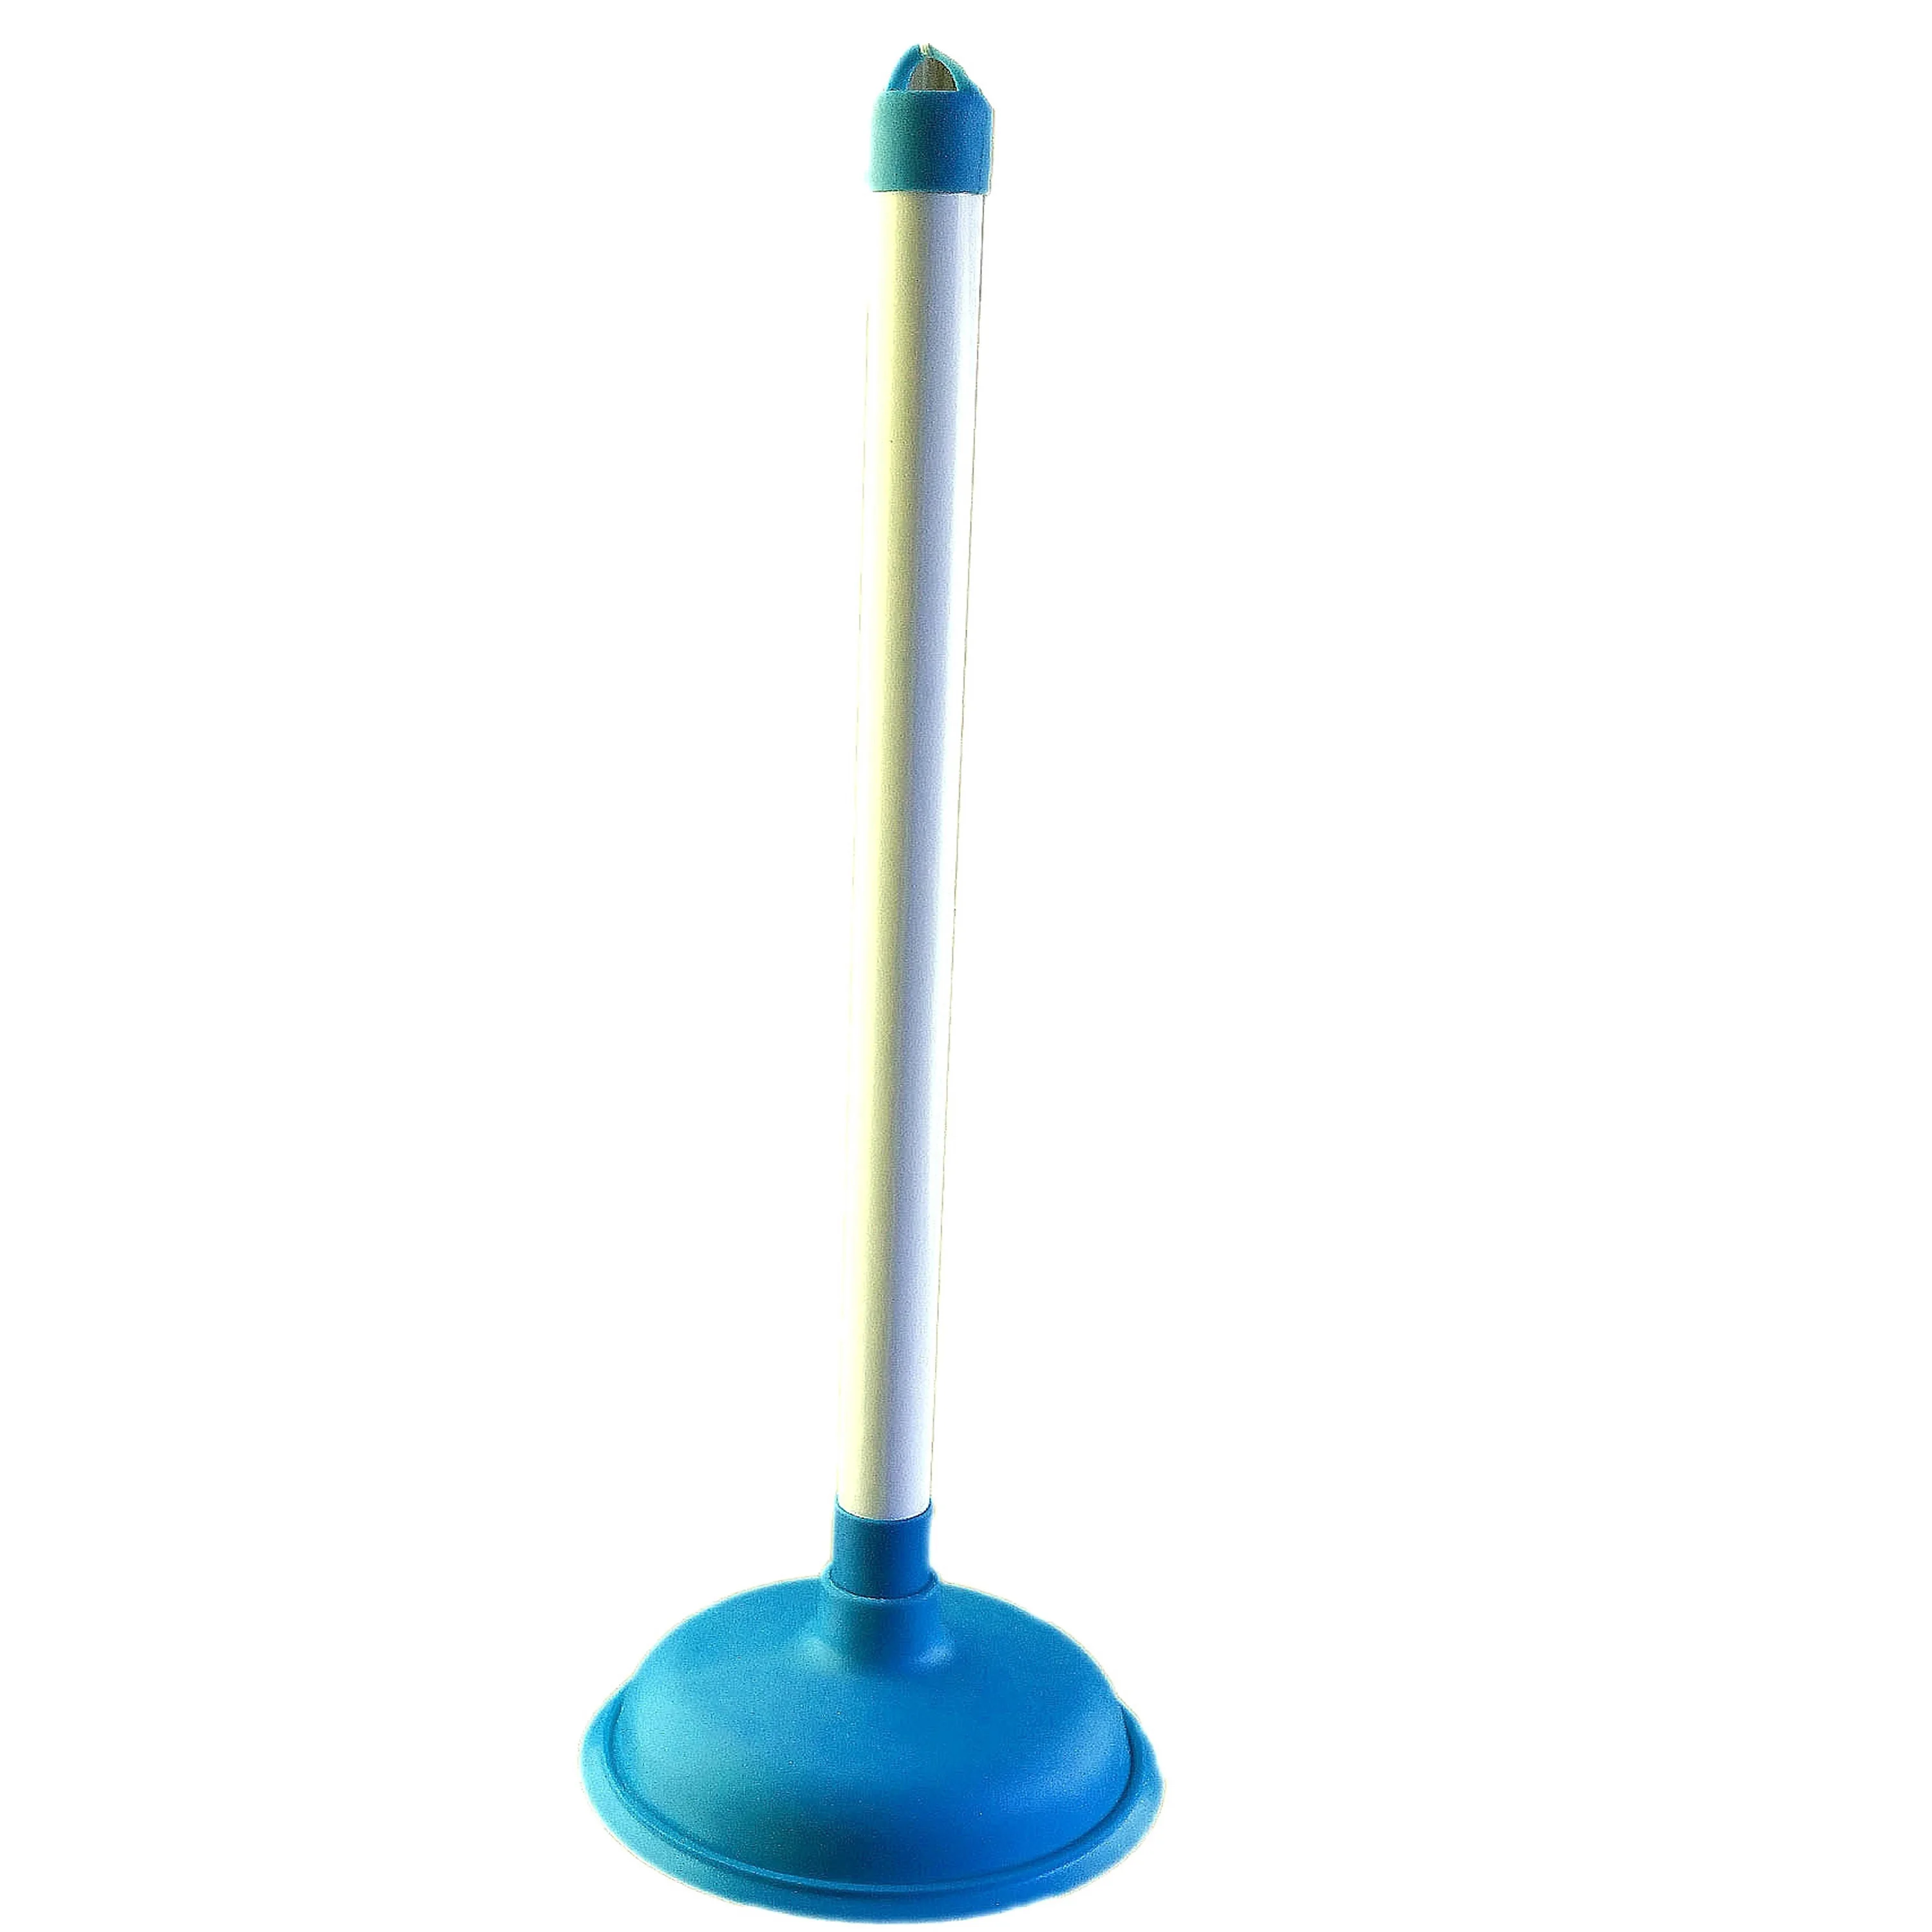 where can you buy a toilet plunger